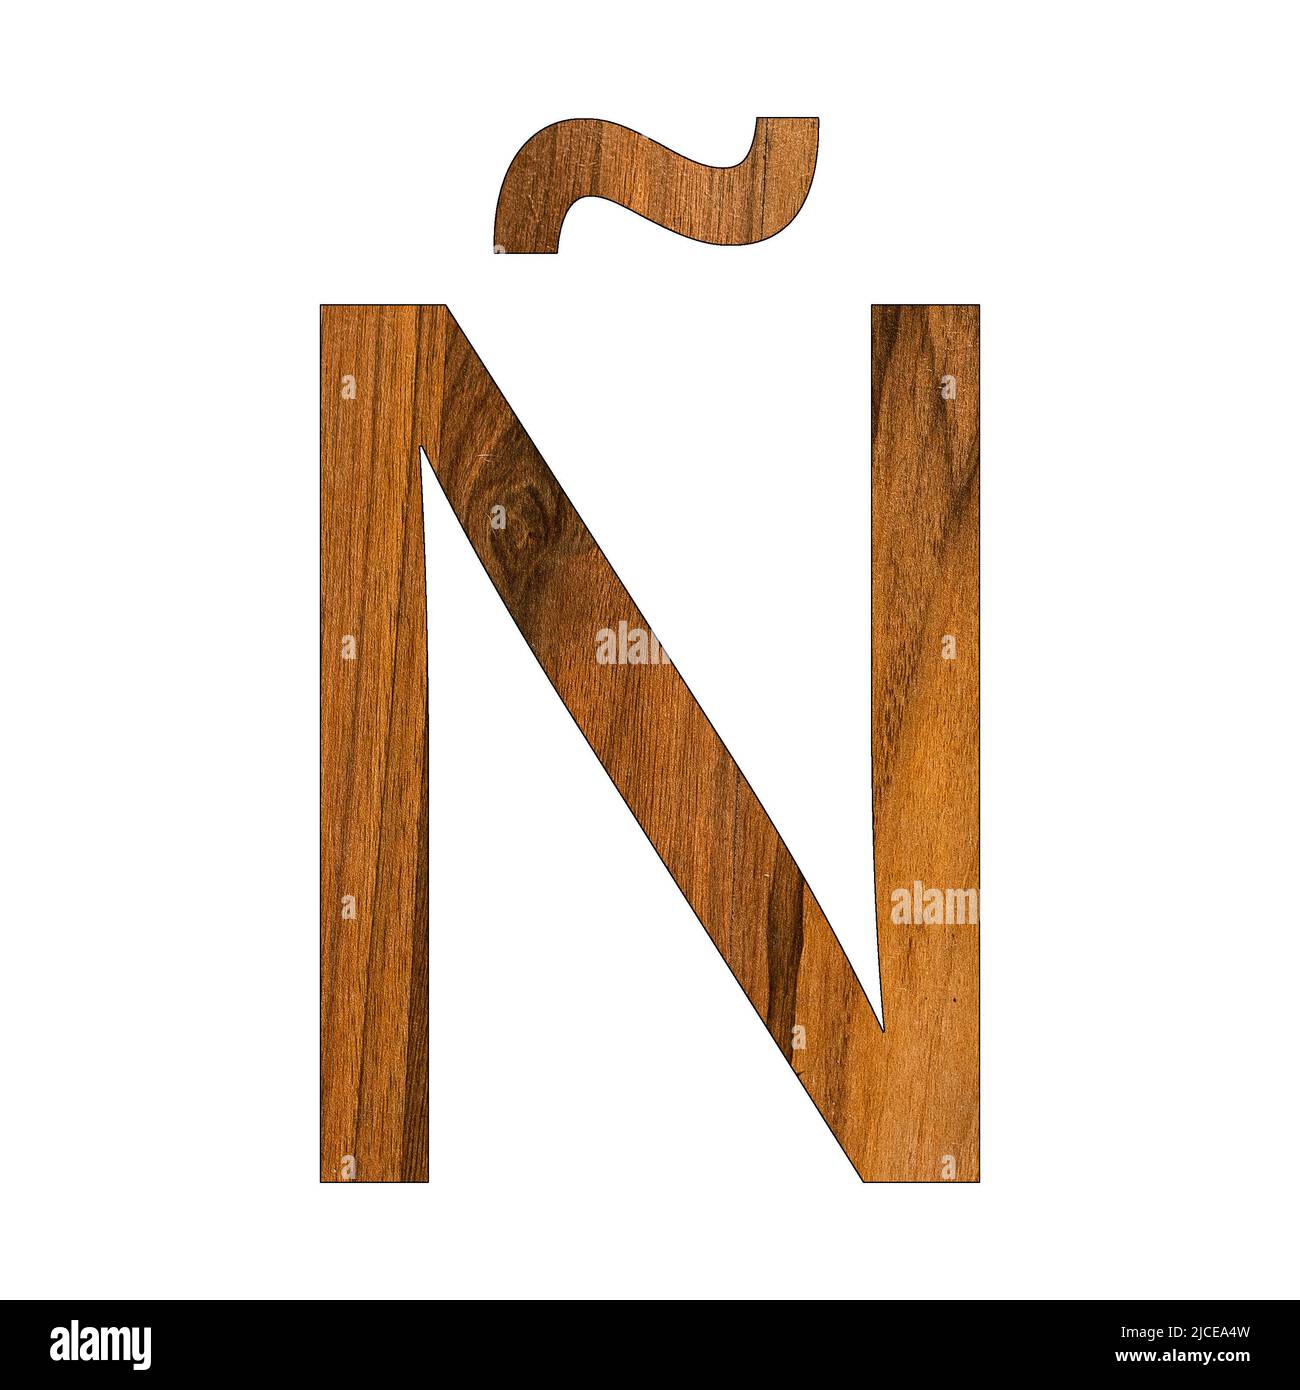 Letter Ñ in wood texture - White background Stock Photo